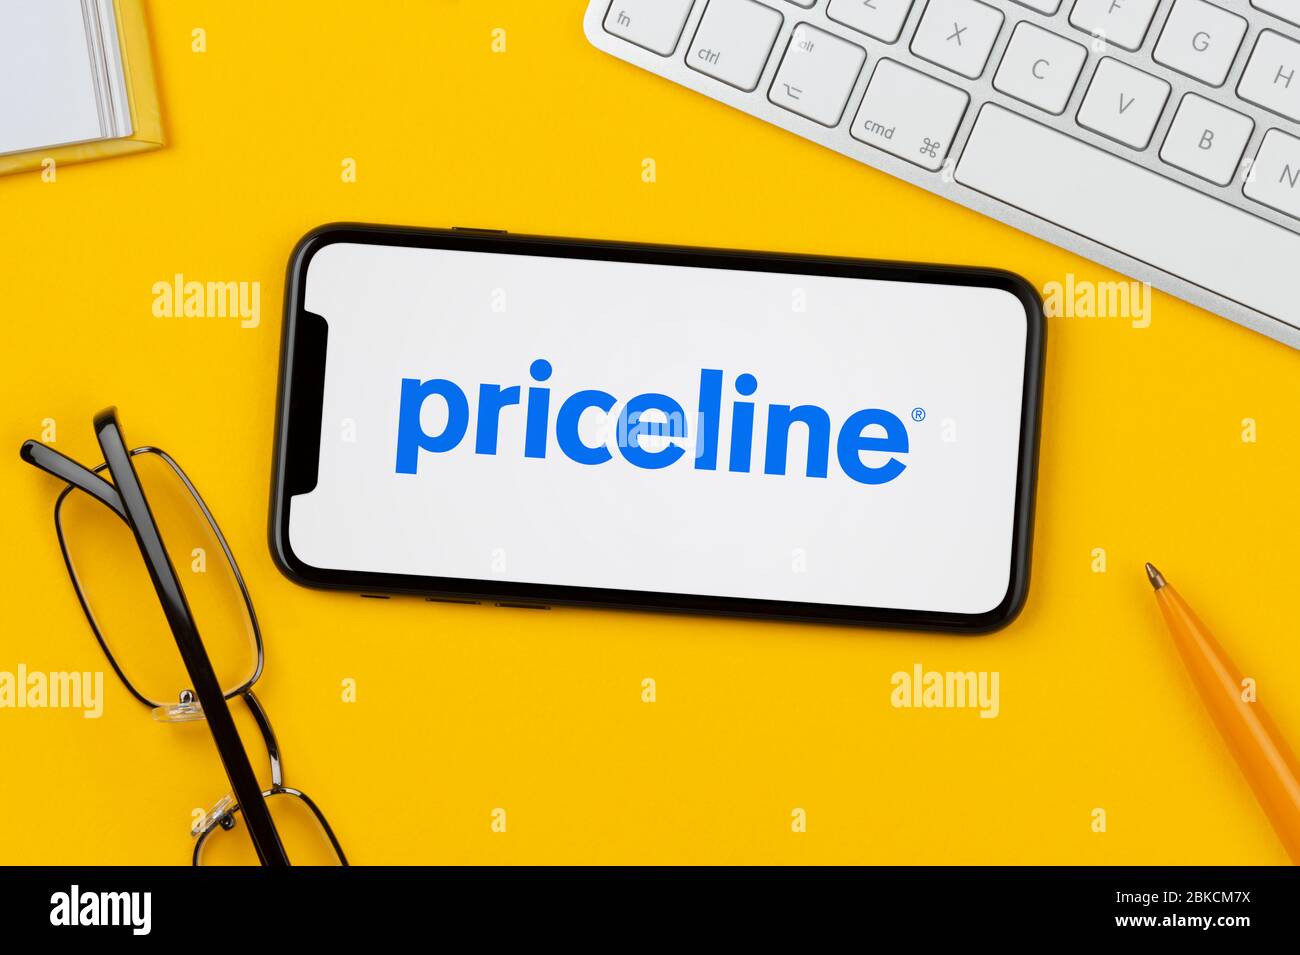 A smartphone showing the Priceline logo rests on a yellow background along with a keyboard, glasses, pen and book (Editorial use only). Stock Photo